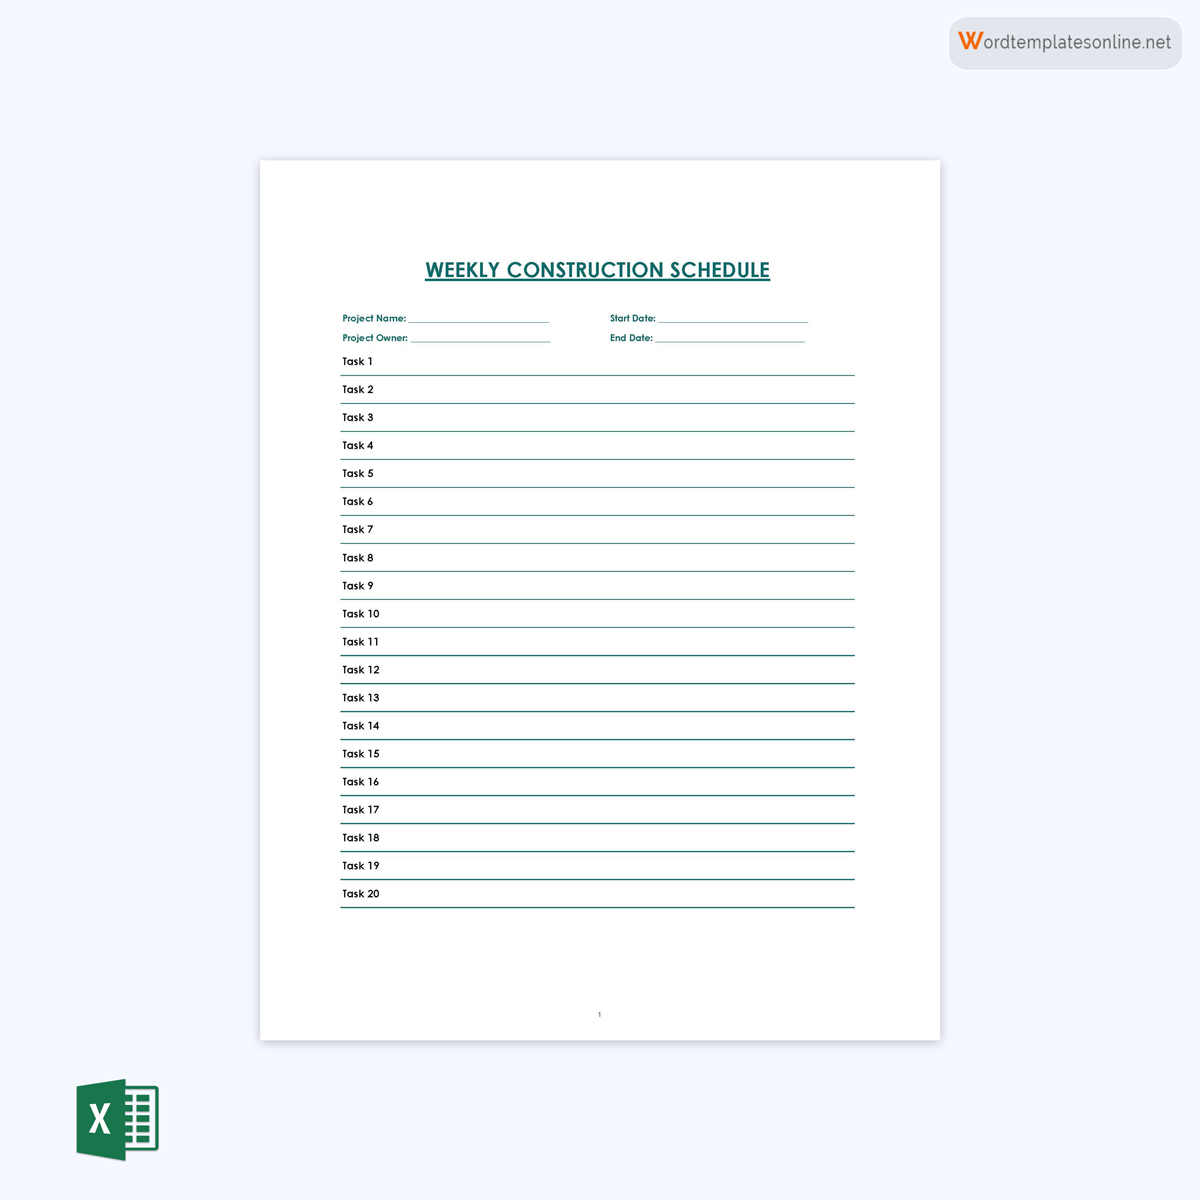 Editable Construction Schedule Template - Excel - Free Download